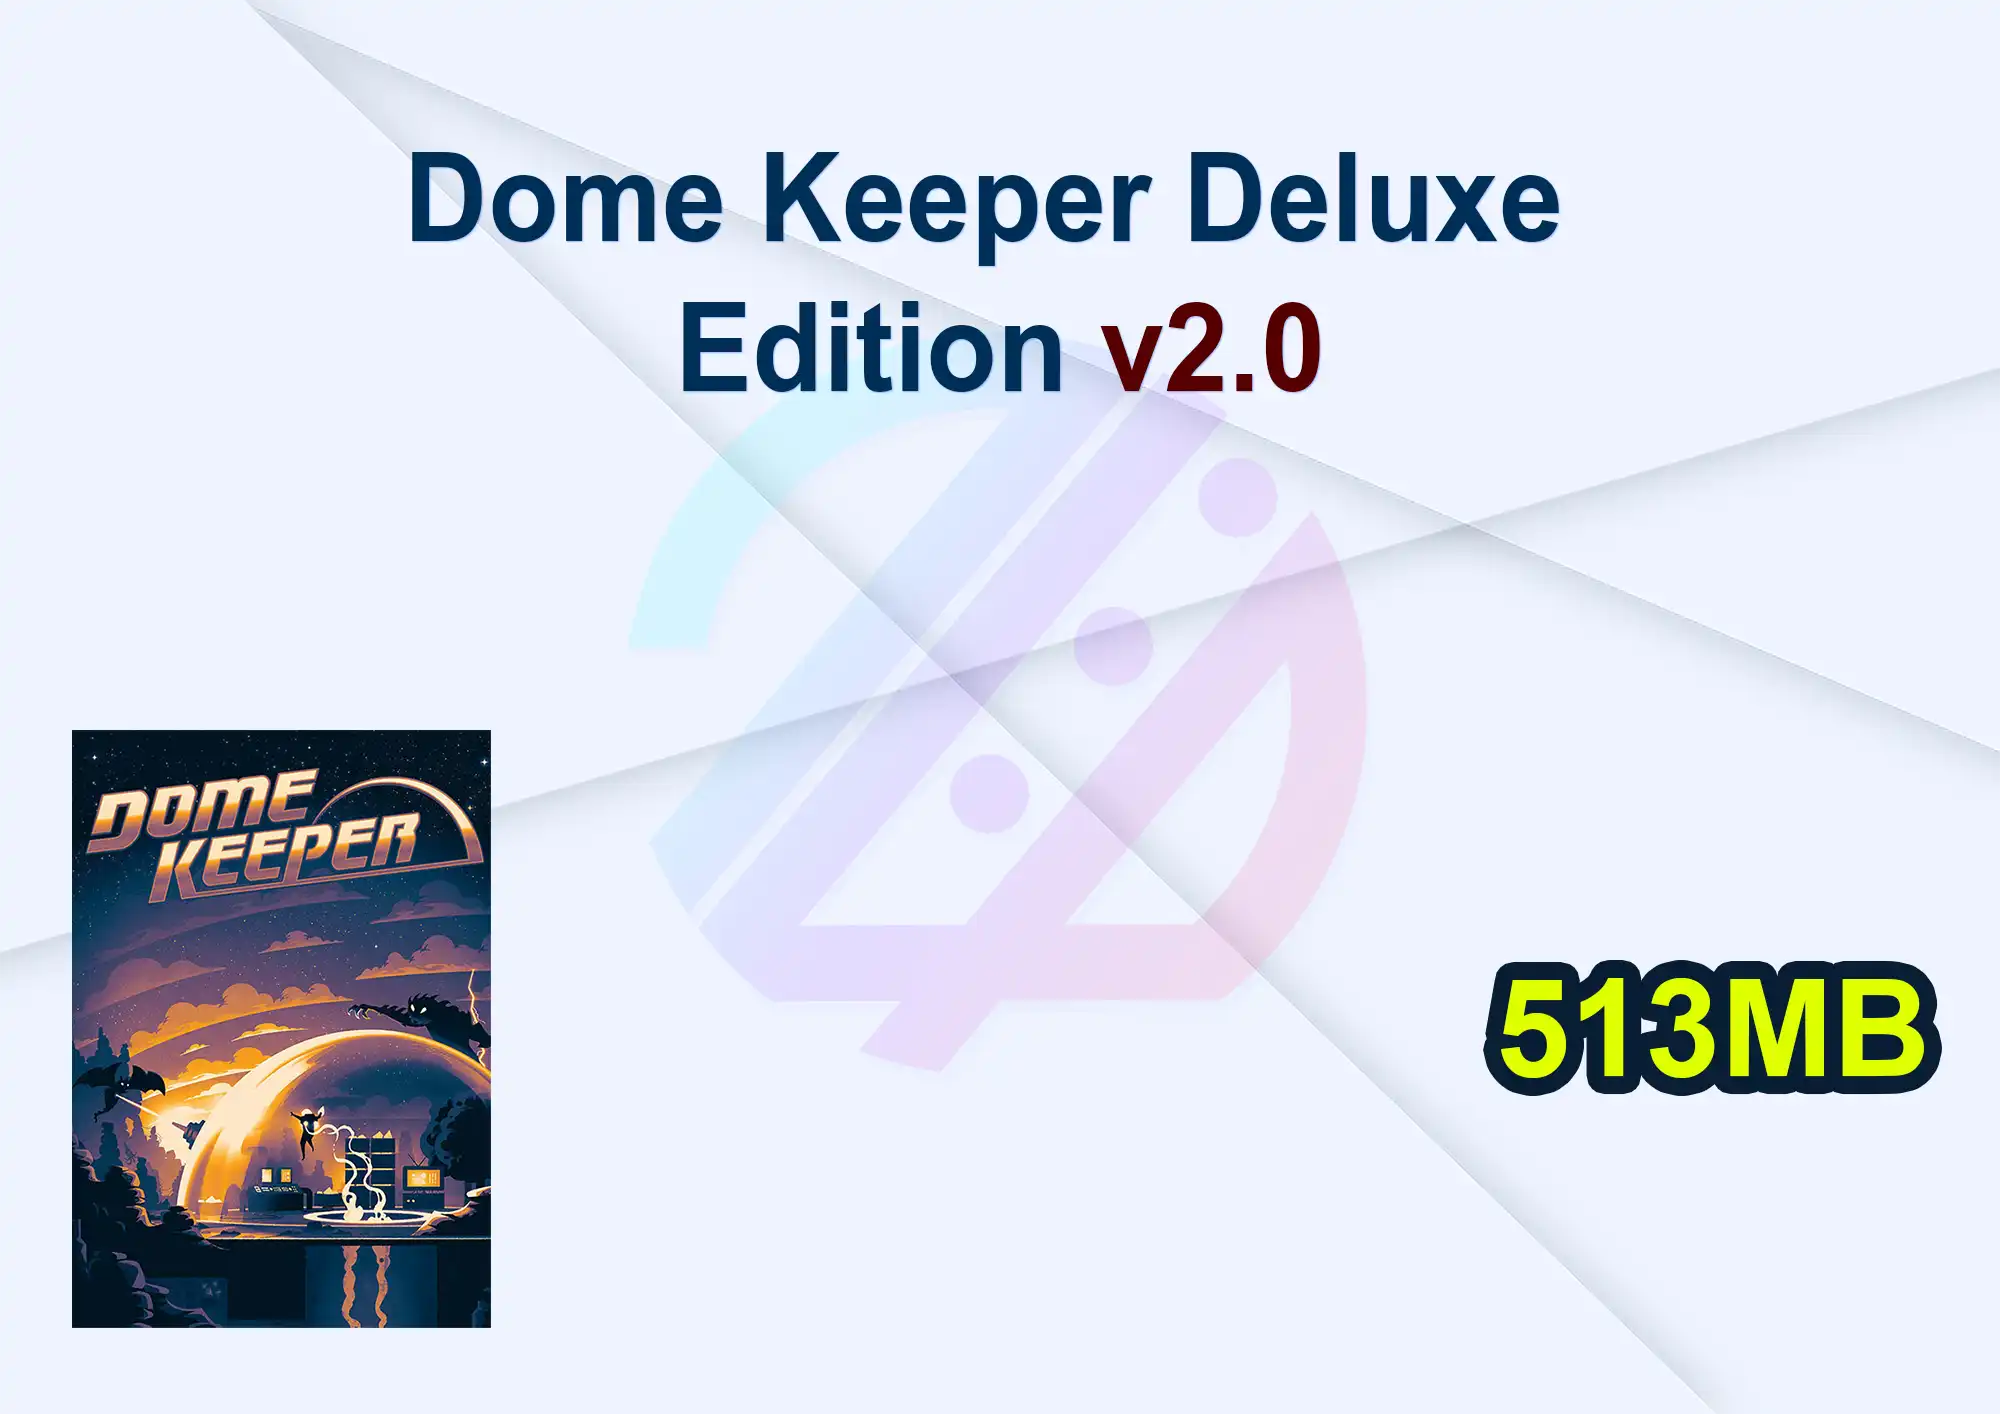 Dome Keeper Deluxe Edition v2.0